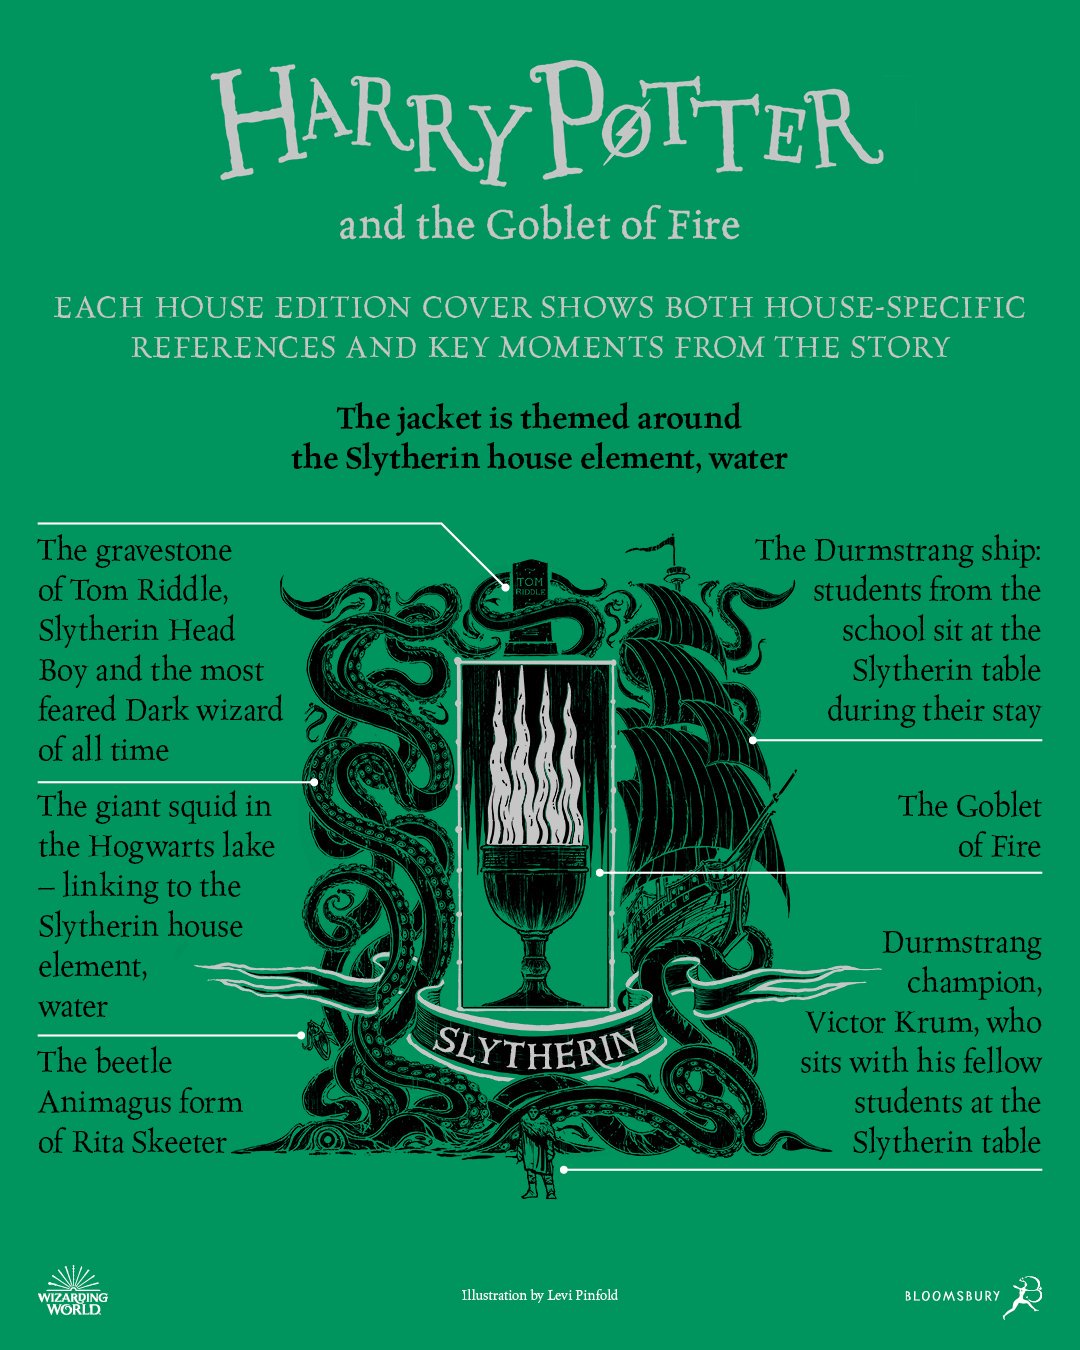 goblet of fire book release date